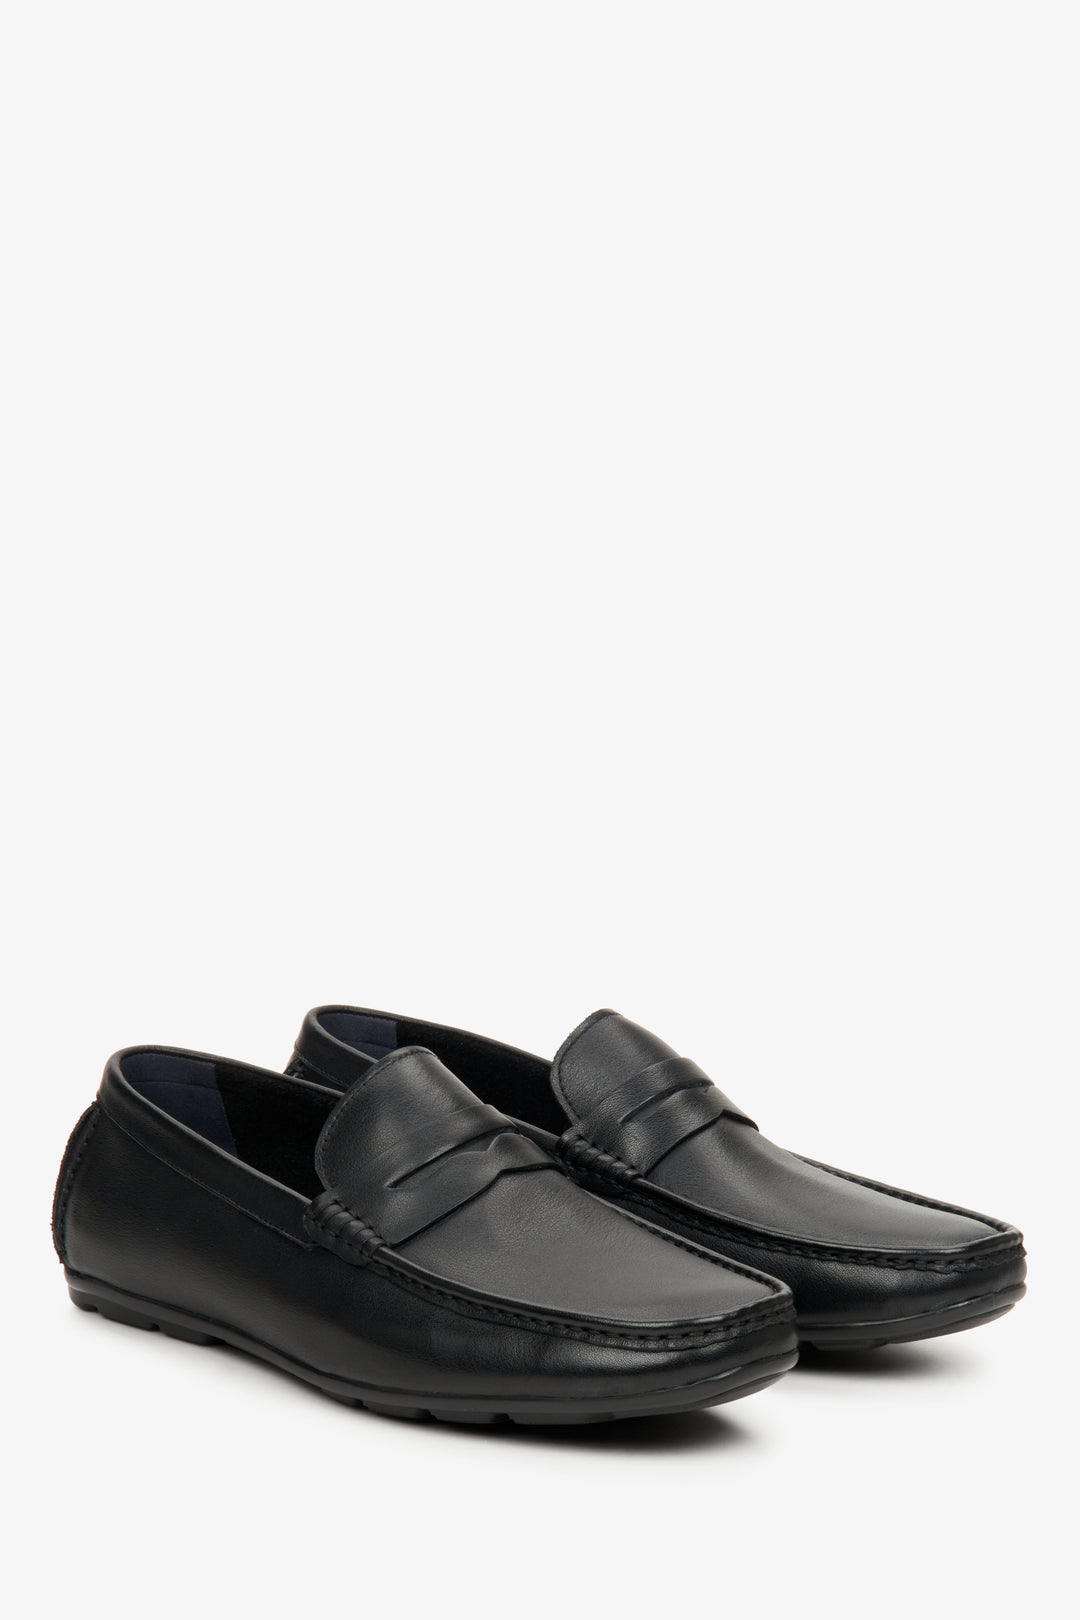 Estro men's black leather loafers - presentation of the toe and side seam of the footwear.